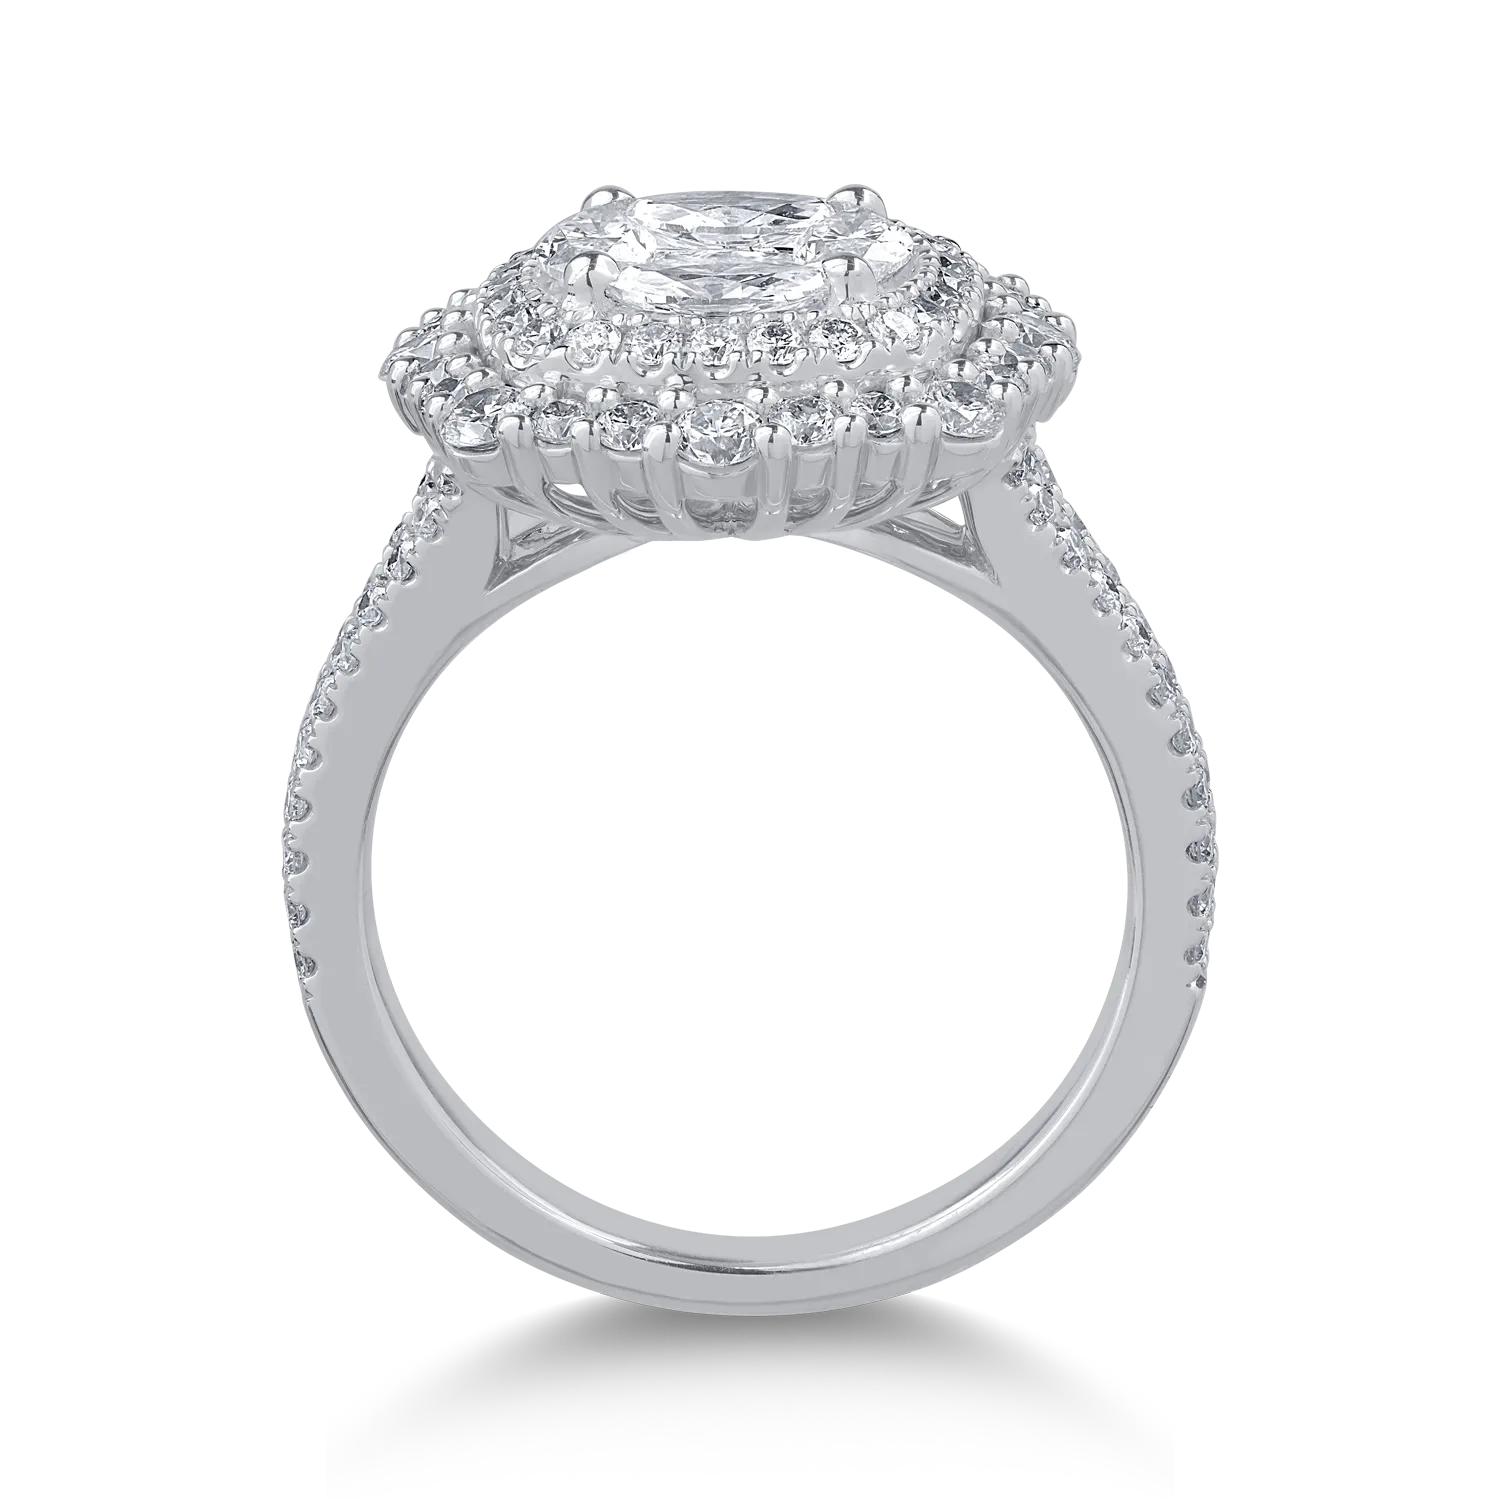 18K white gold ring with 1.77ct diamonds